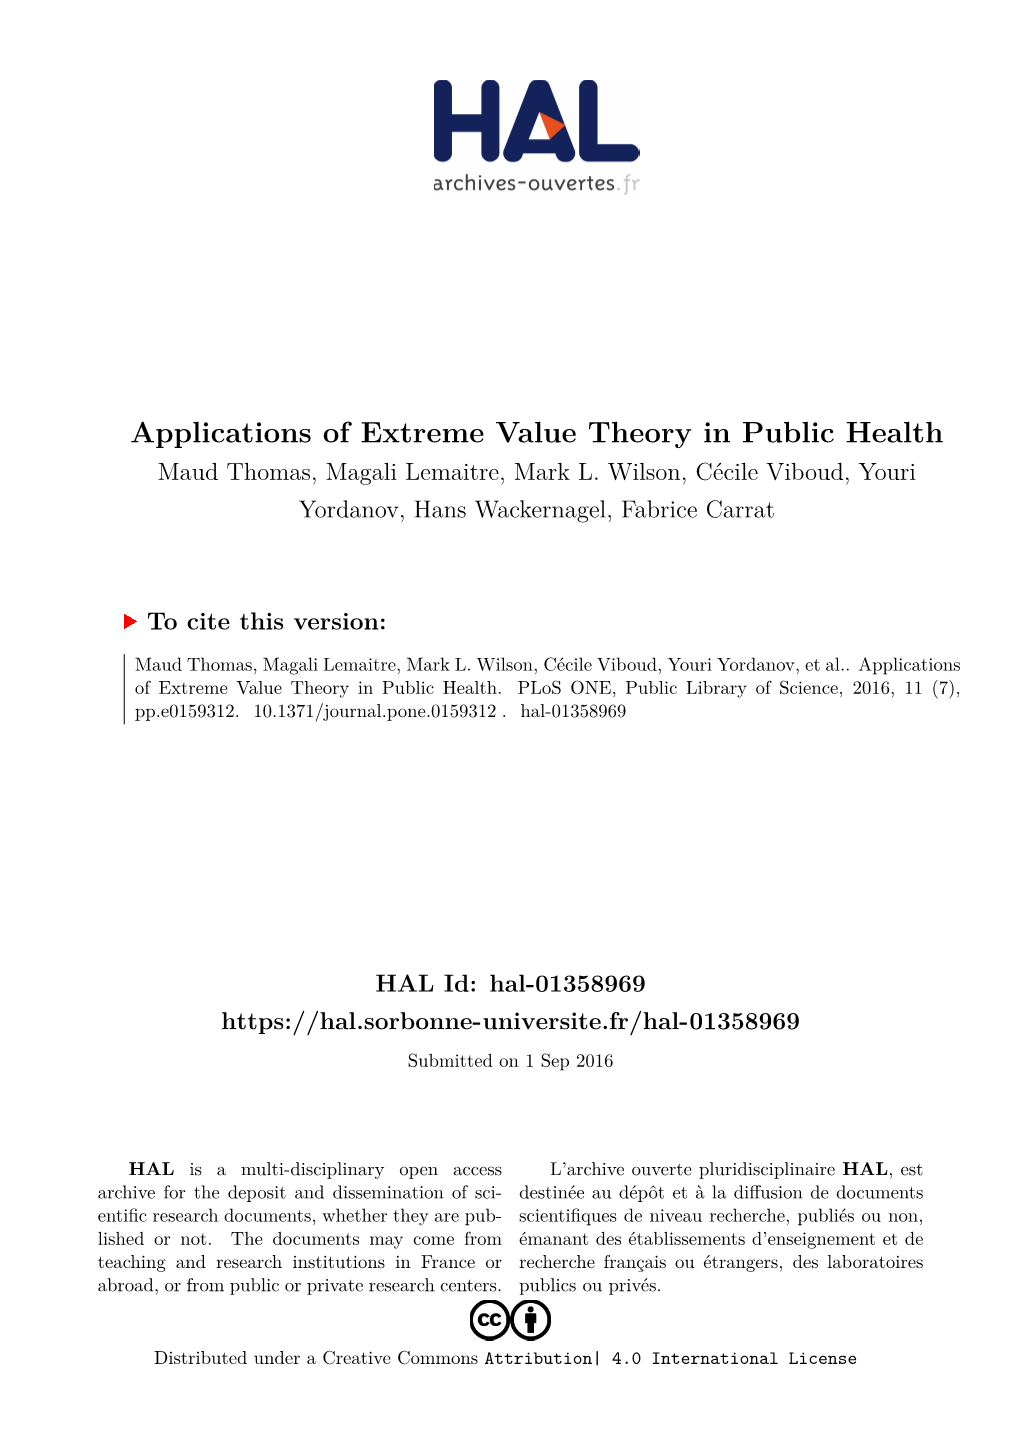 Applications of Extreme Value Theory in Public Health Maud Thomas, Magali Lemaitre, Mark L